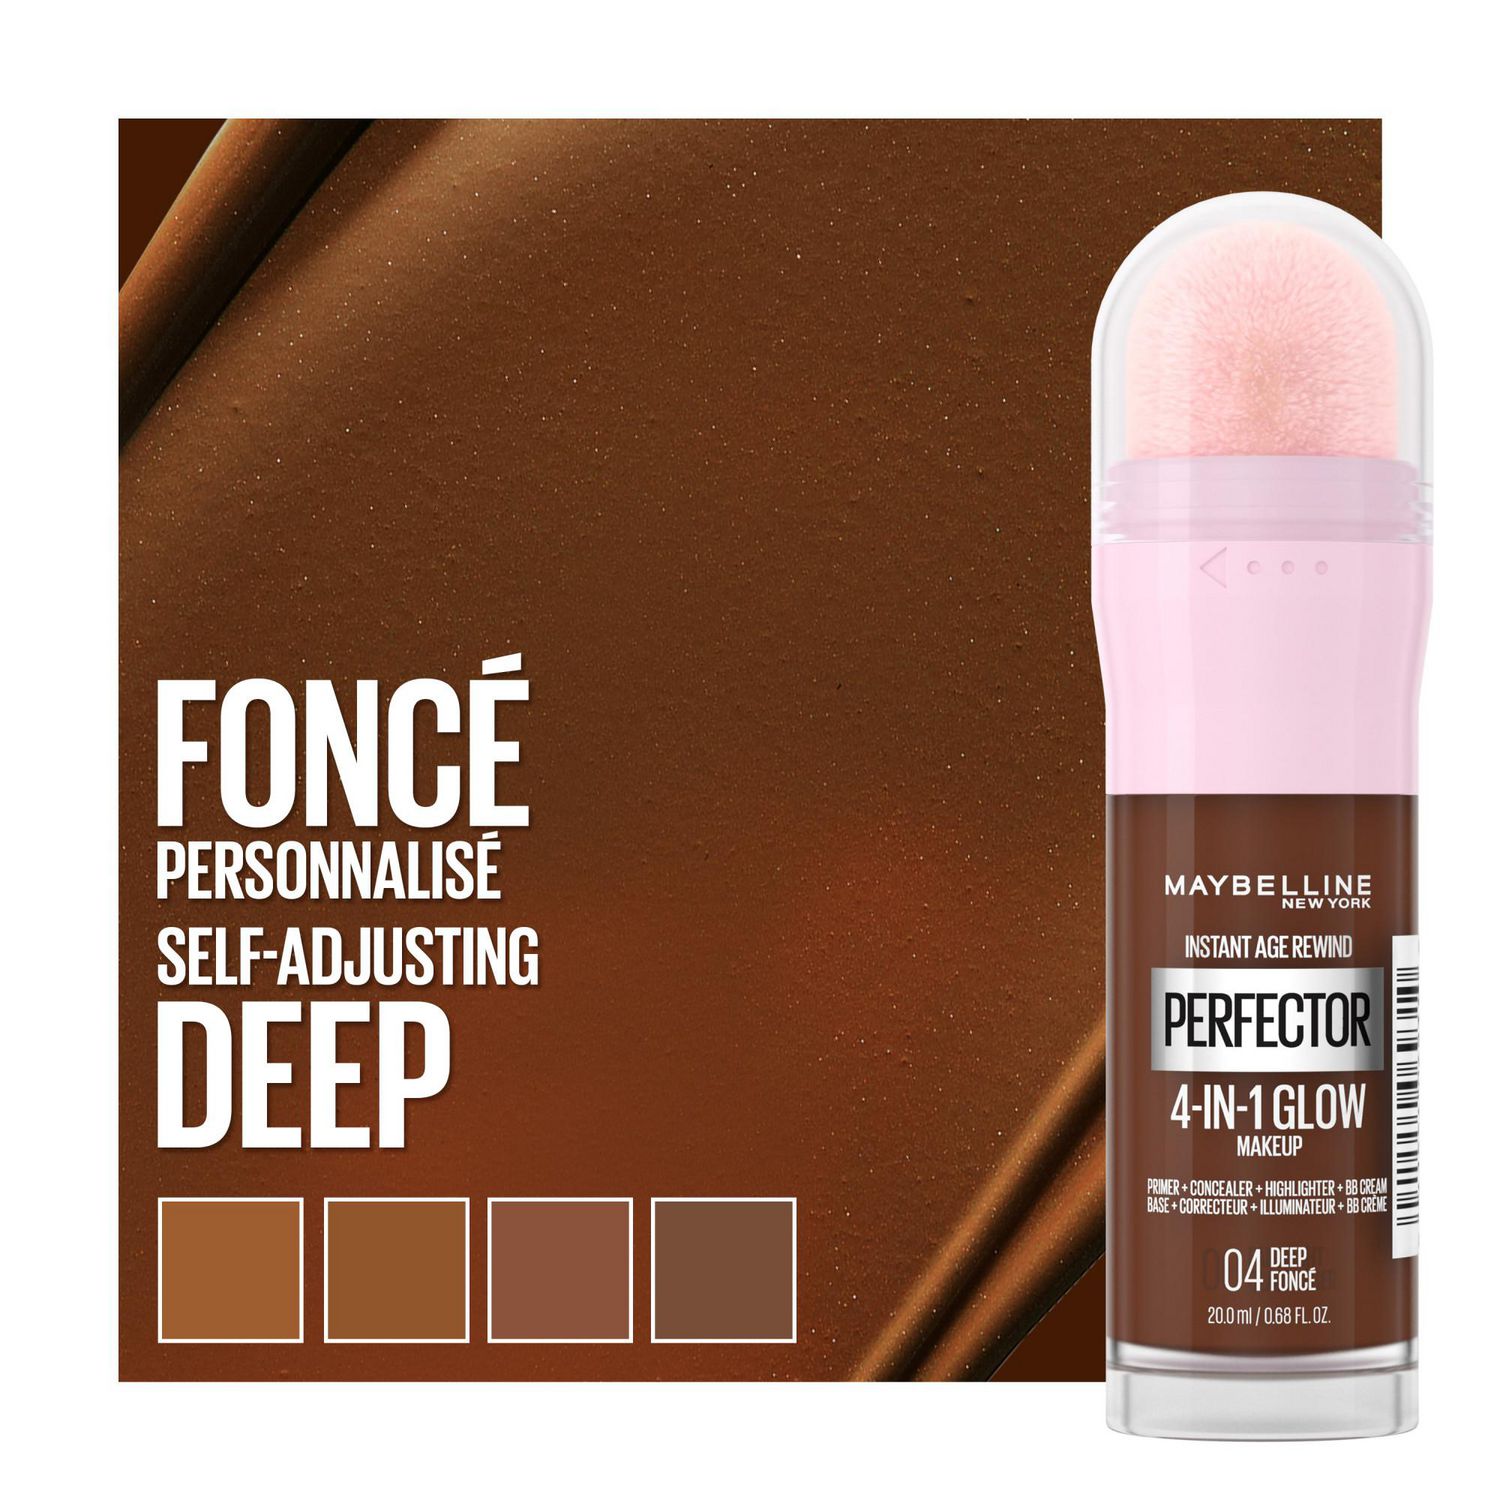 a　Maybelline　glow　Medium-Deep　New　Warm,　Instant　Rewind®　York　Face　Makeup,　makeup　perfected　Instant　for　Age　Makeup　4-in-1　Glow　Perfector　-In-1　look.